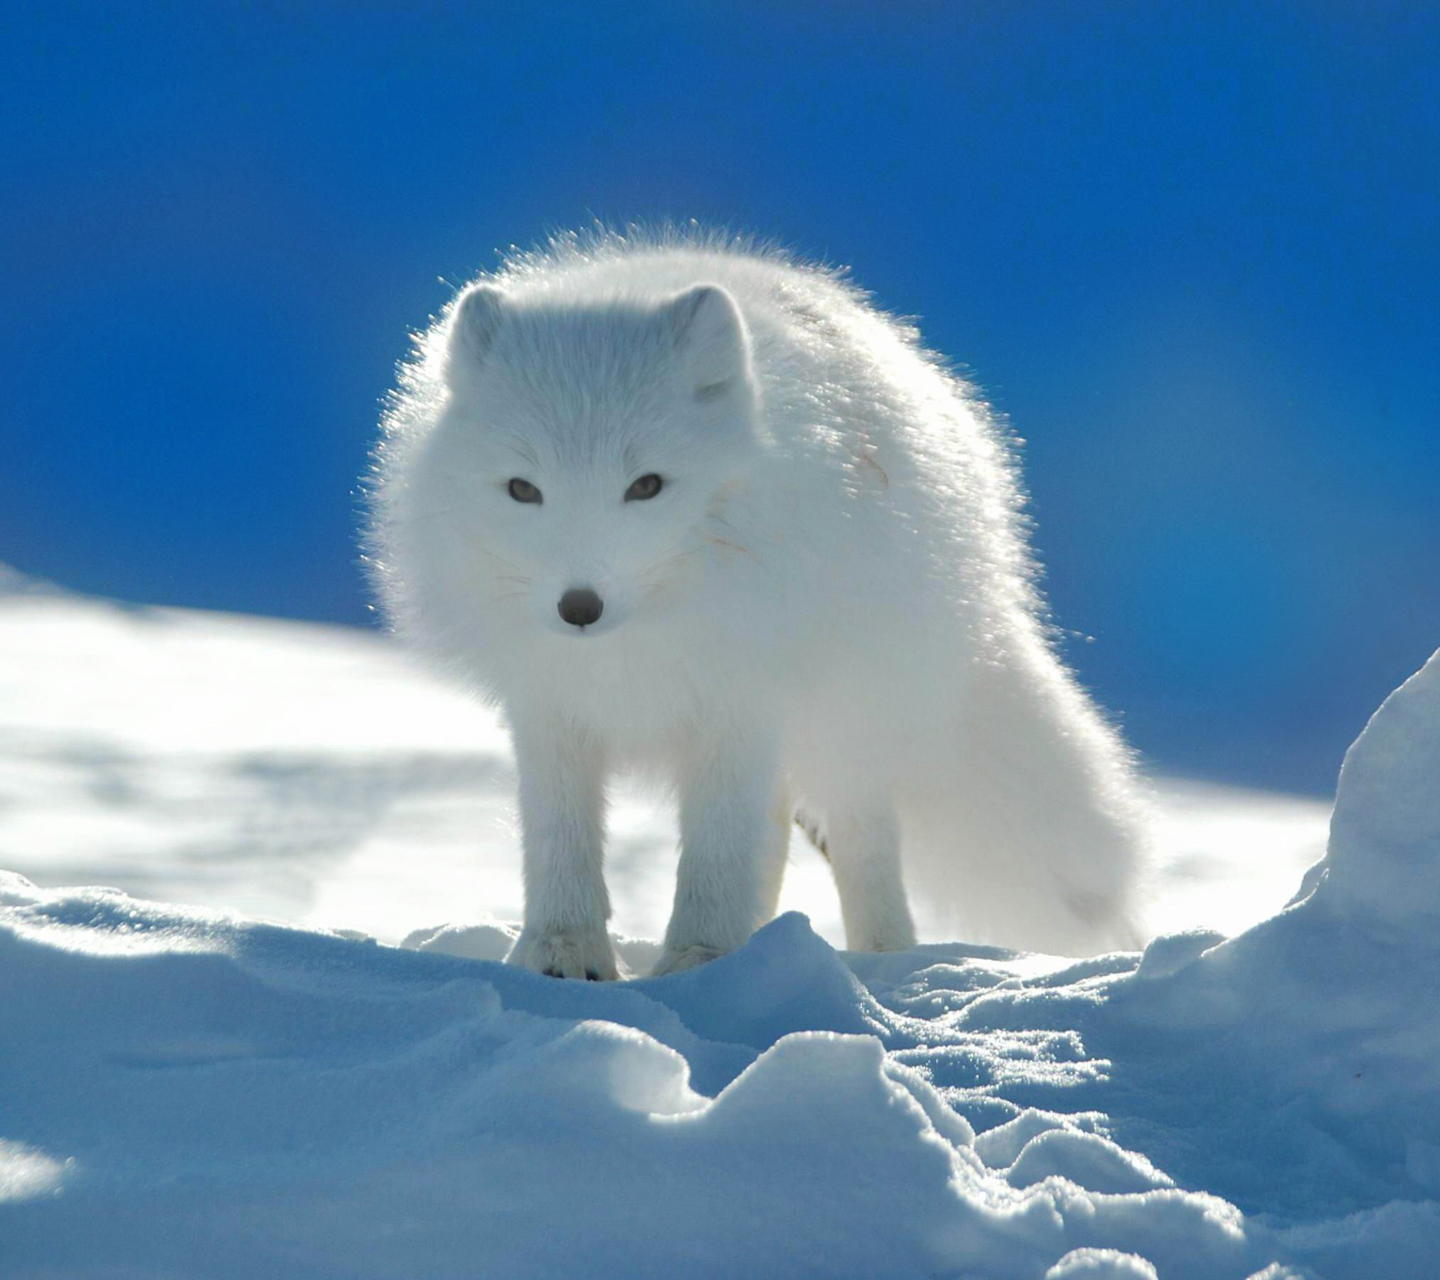 Galaxy S3 Wallpaper - White Fox - HD Wallpapers - 9to5Wallpapers